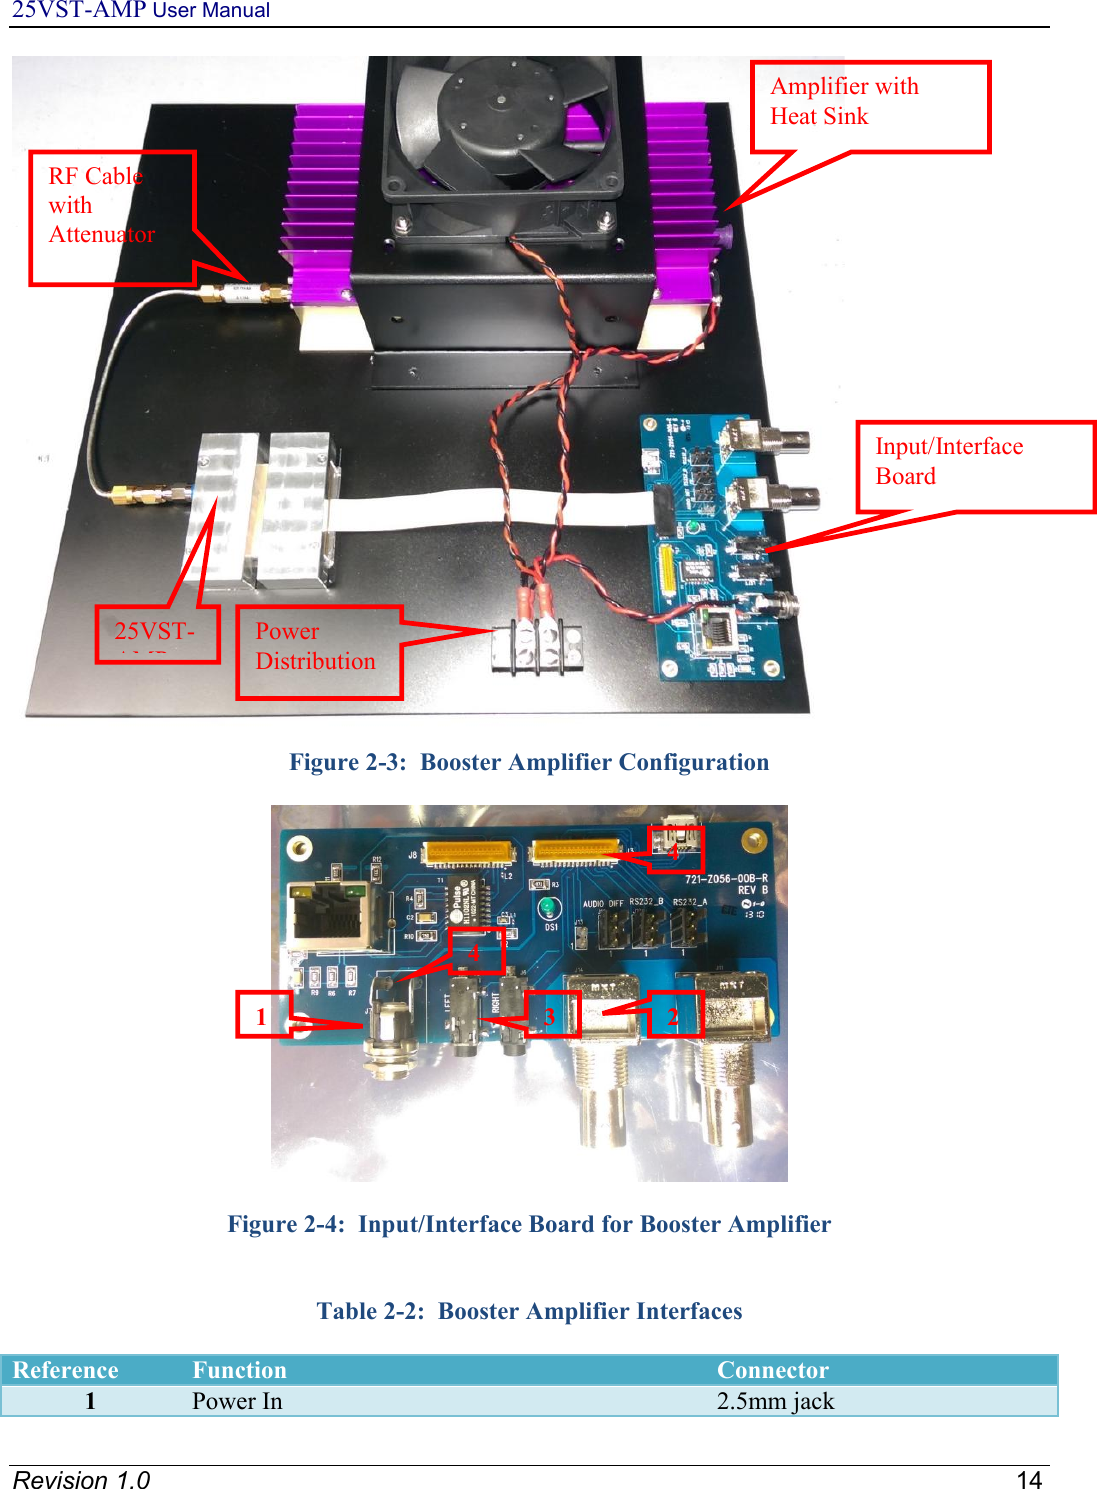 25VST-AMP User Manual   Revision 1.0    14  Figure 2-3:  Booster Amplifier Configuration    Figure 2-4:  Input/Interface Board for Booster Amplifier   Table 2-2:  Booster Amplifier Interfaces  Reference  Function  Connector 1  Power In  2.5mm jack Amplifier with Heat Sink 25VST-AMP Power Distribution RF Cable with Attenuator Input/Interface Board 1 2 3 4 4 